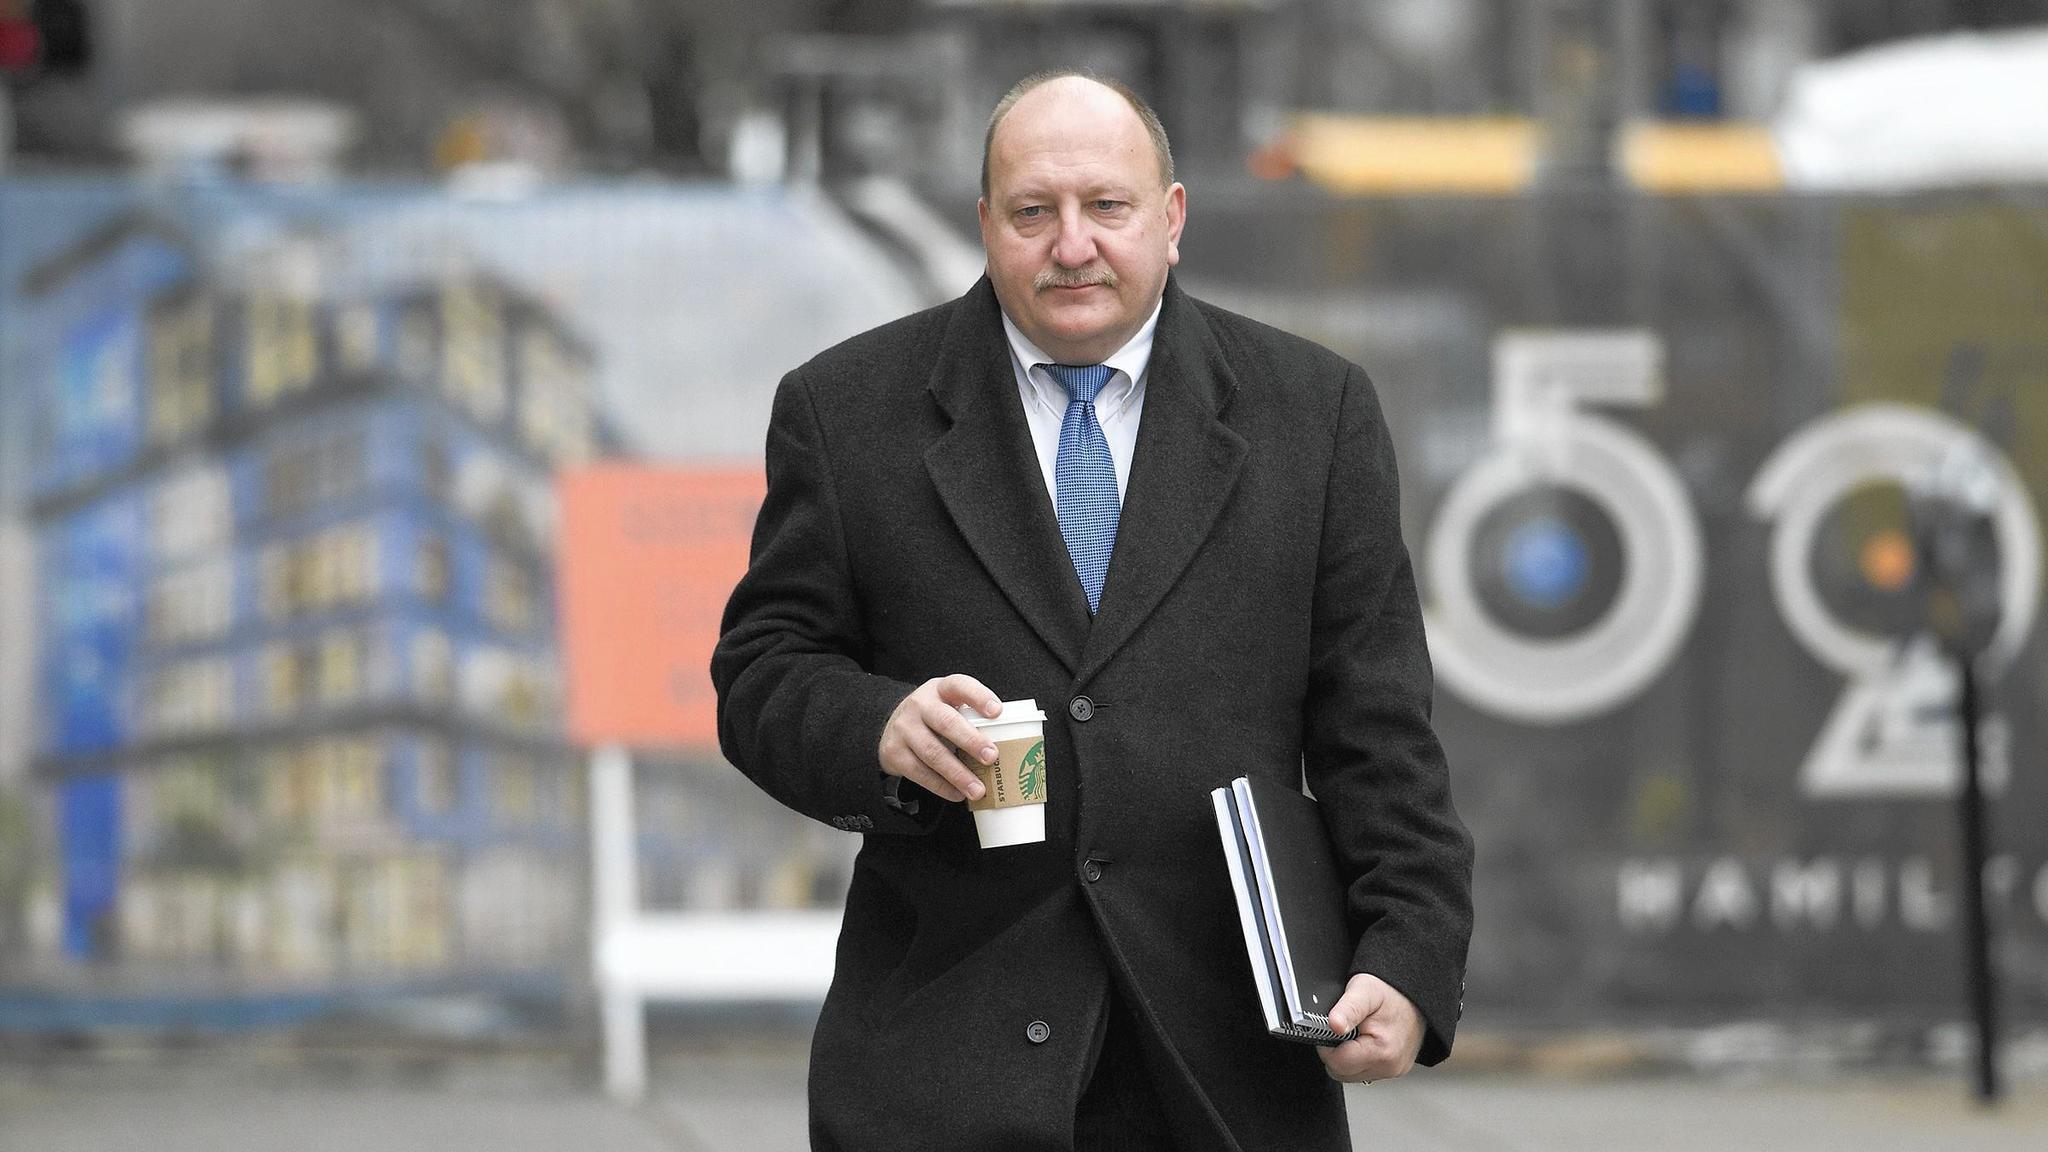 Jury will have to decide which is the real Ed Pawlowski - The Morning Call